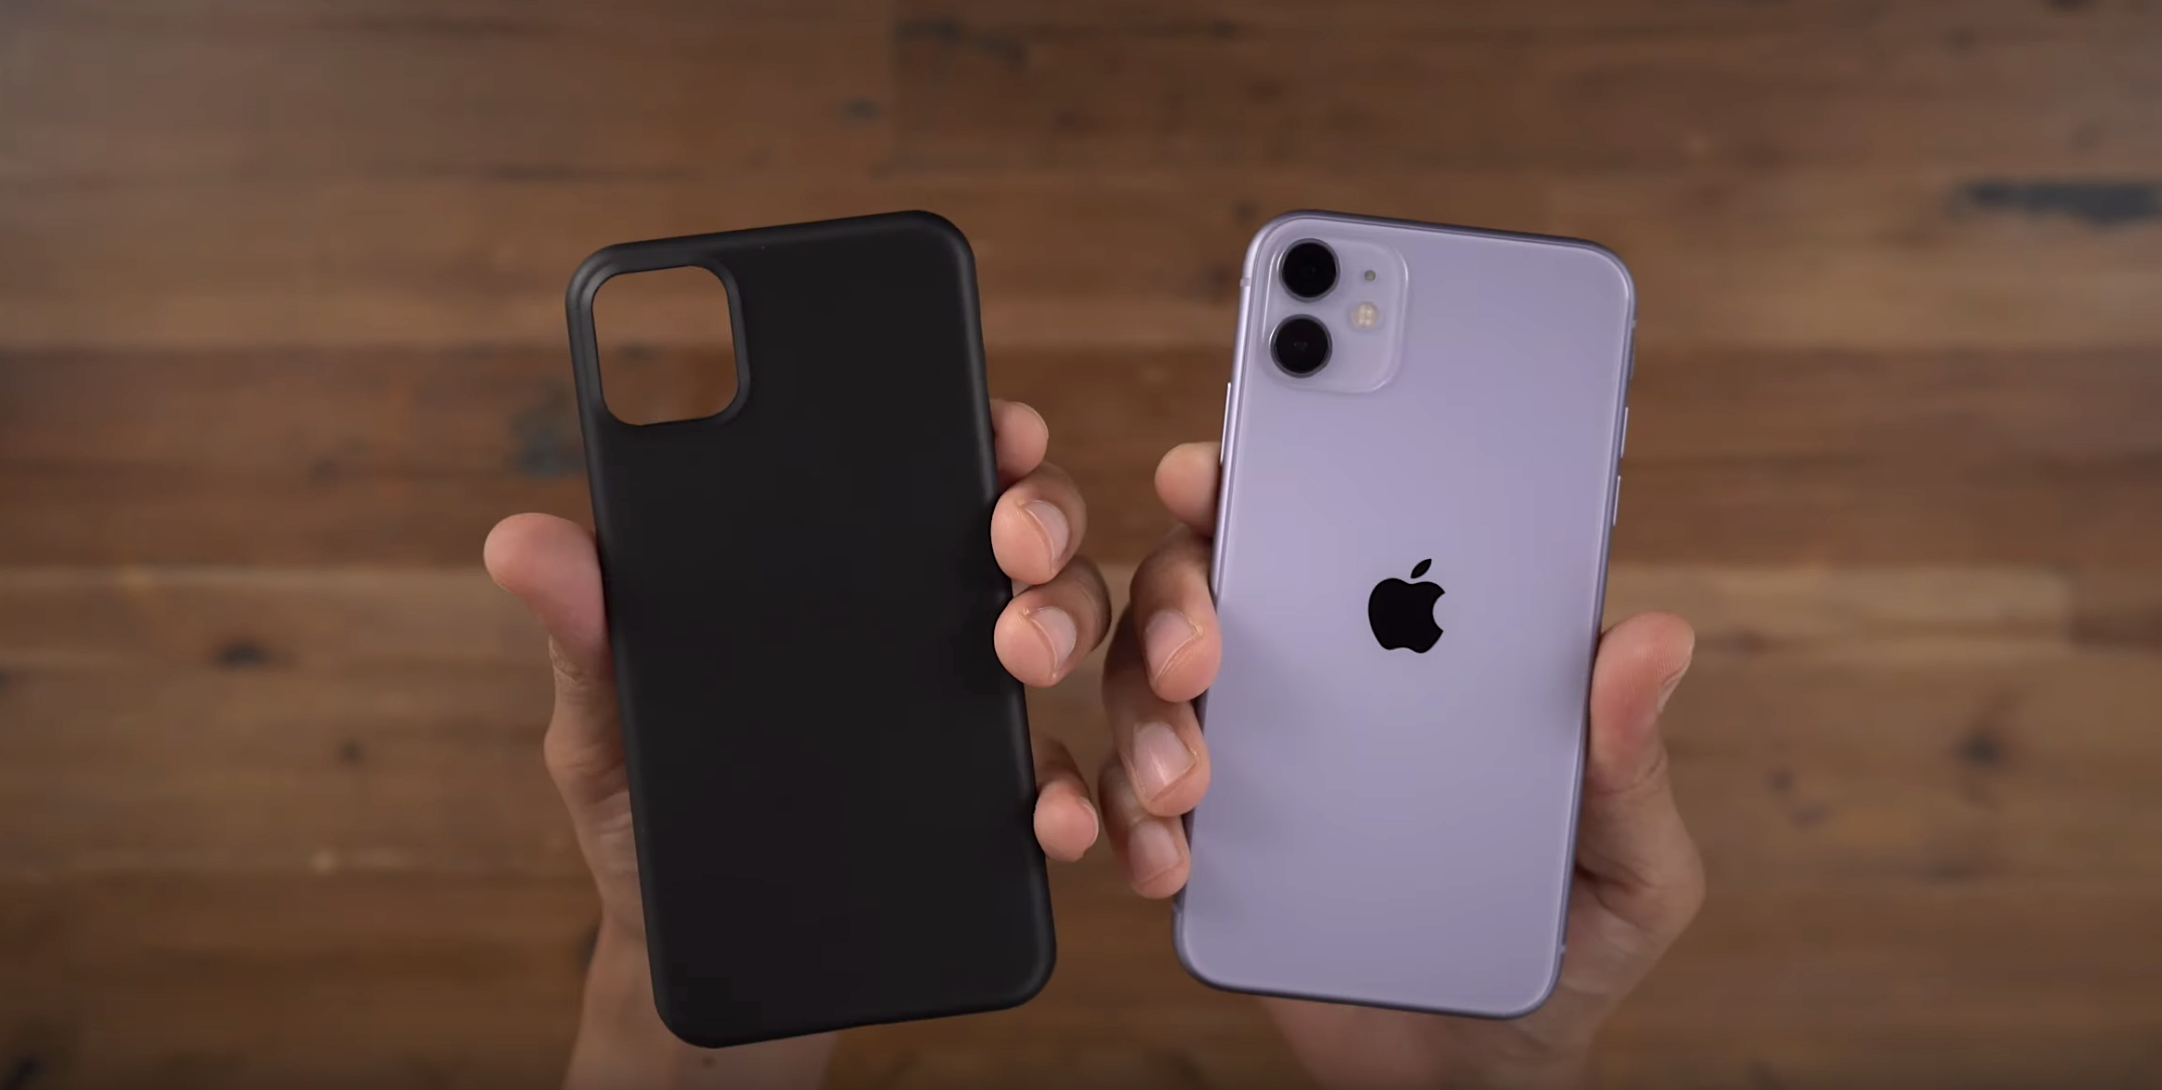 Iphone 11 Pro Case. Iphone 11 Pro on hand. Iphone 14 Pro Max Case hand. Iphone 11 Pro and 11 Case. Айфон 11 ночью